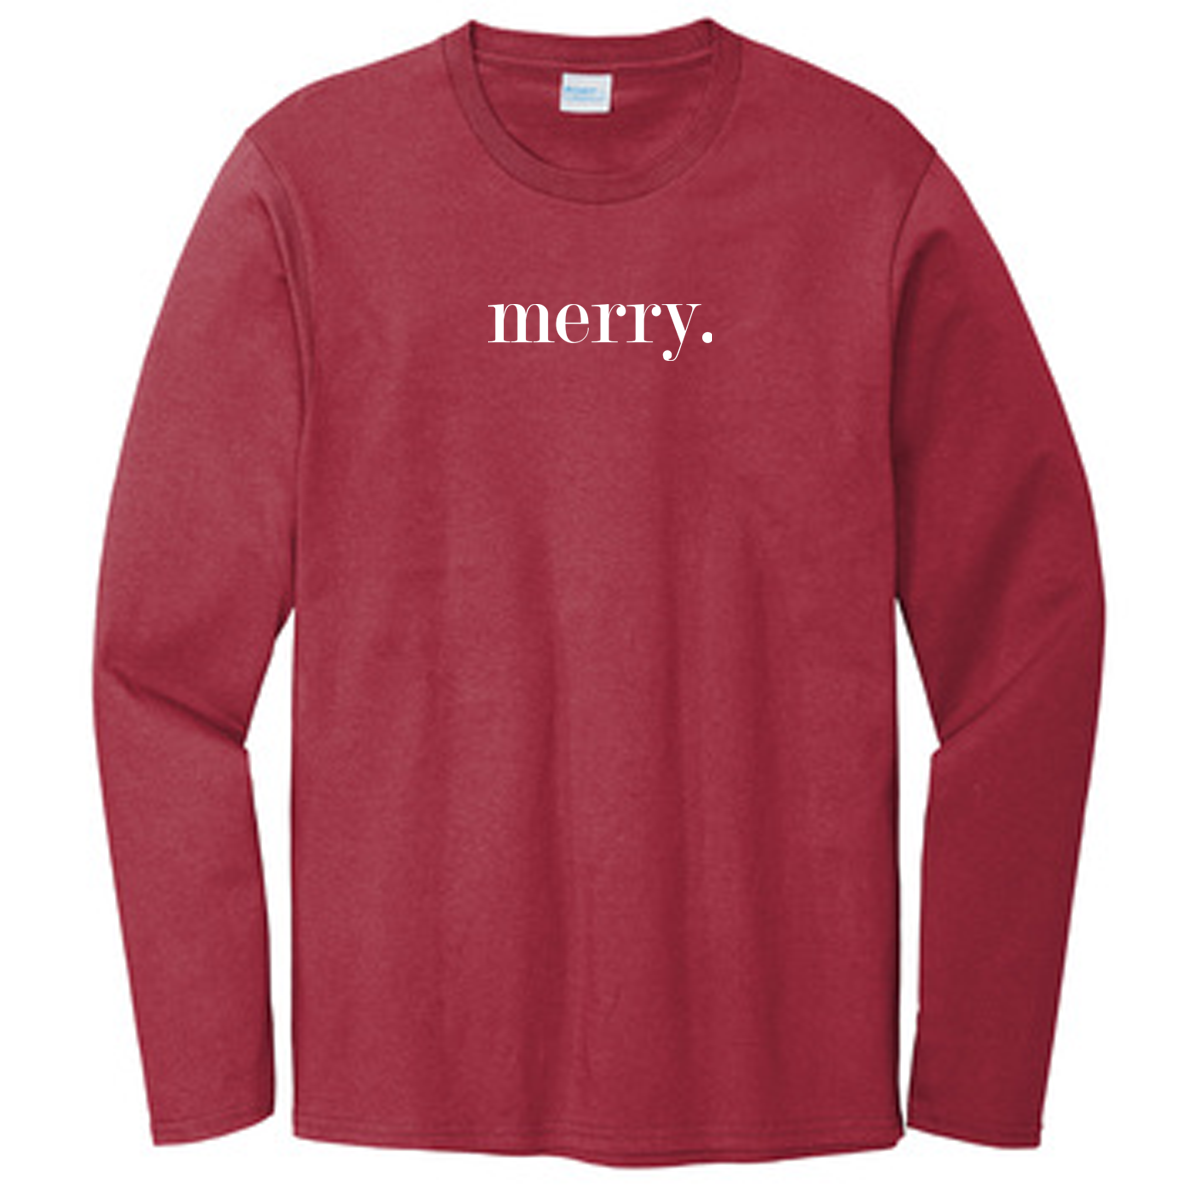 Merry. - Red Long Sleeve Tee - Southern Grace Creations